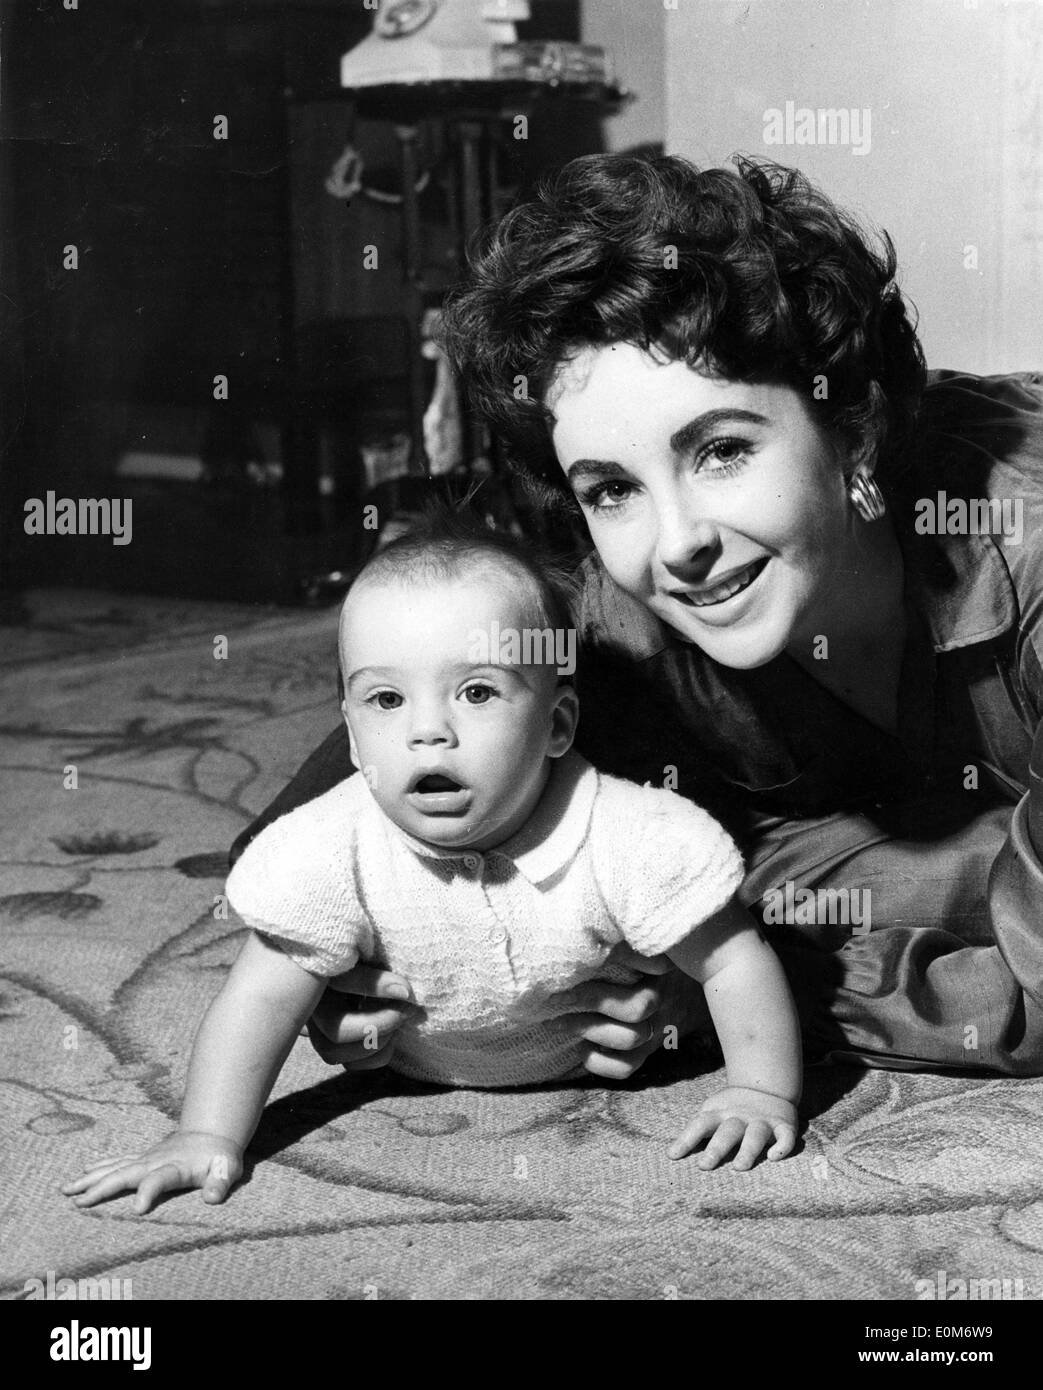 Actress Elizabeth Taylor playing with her baby at home Stock Photo